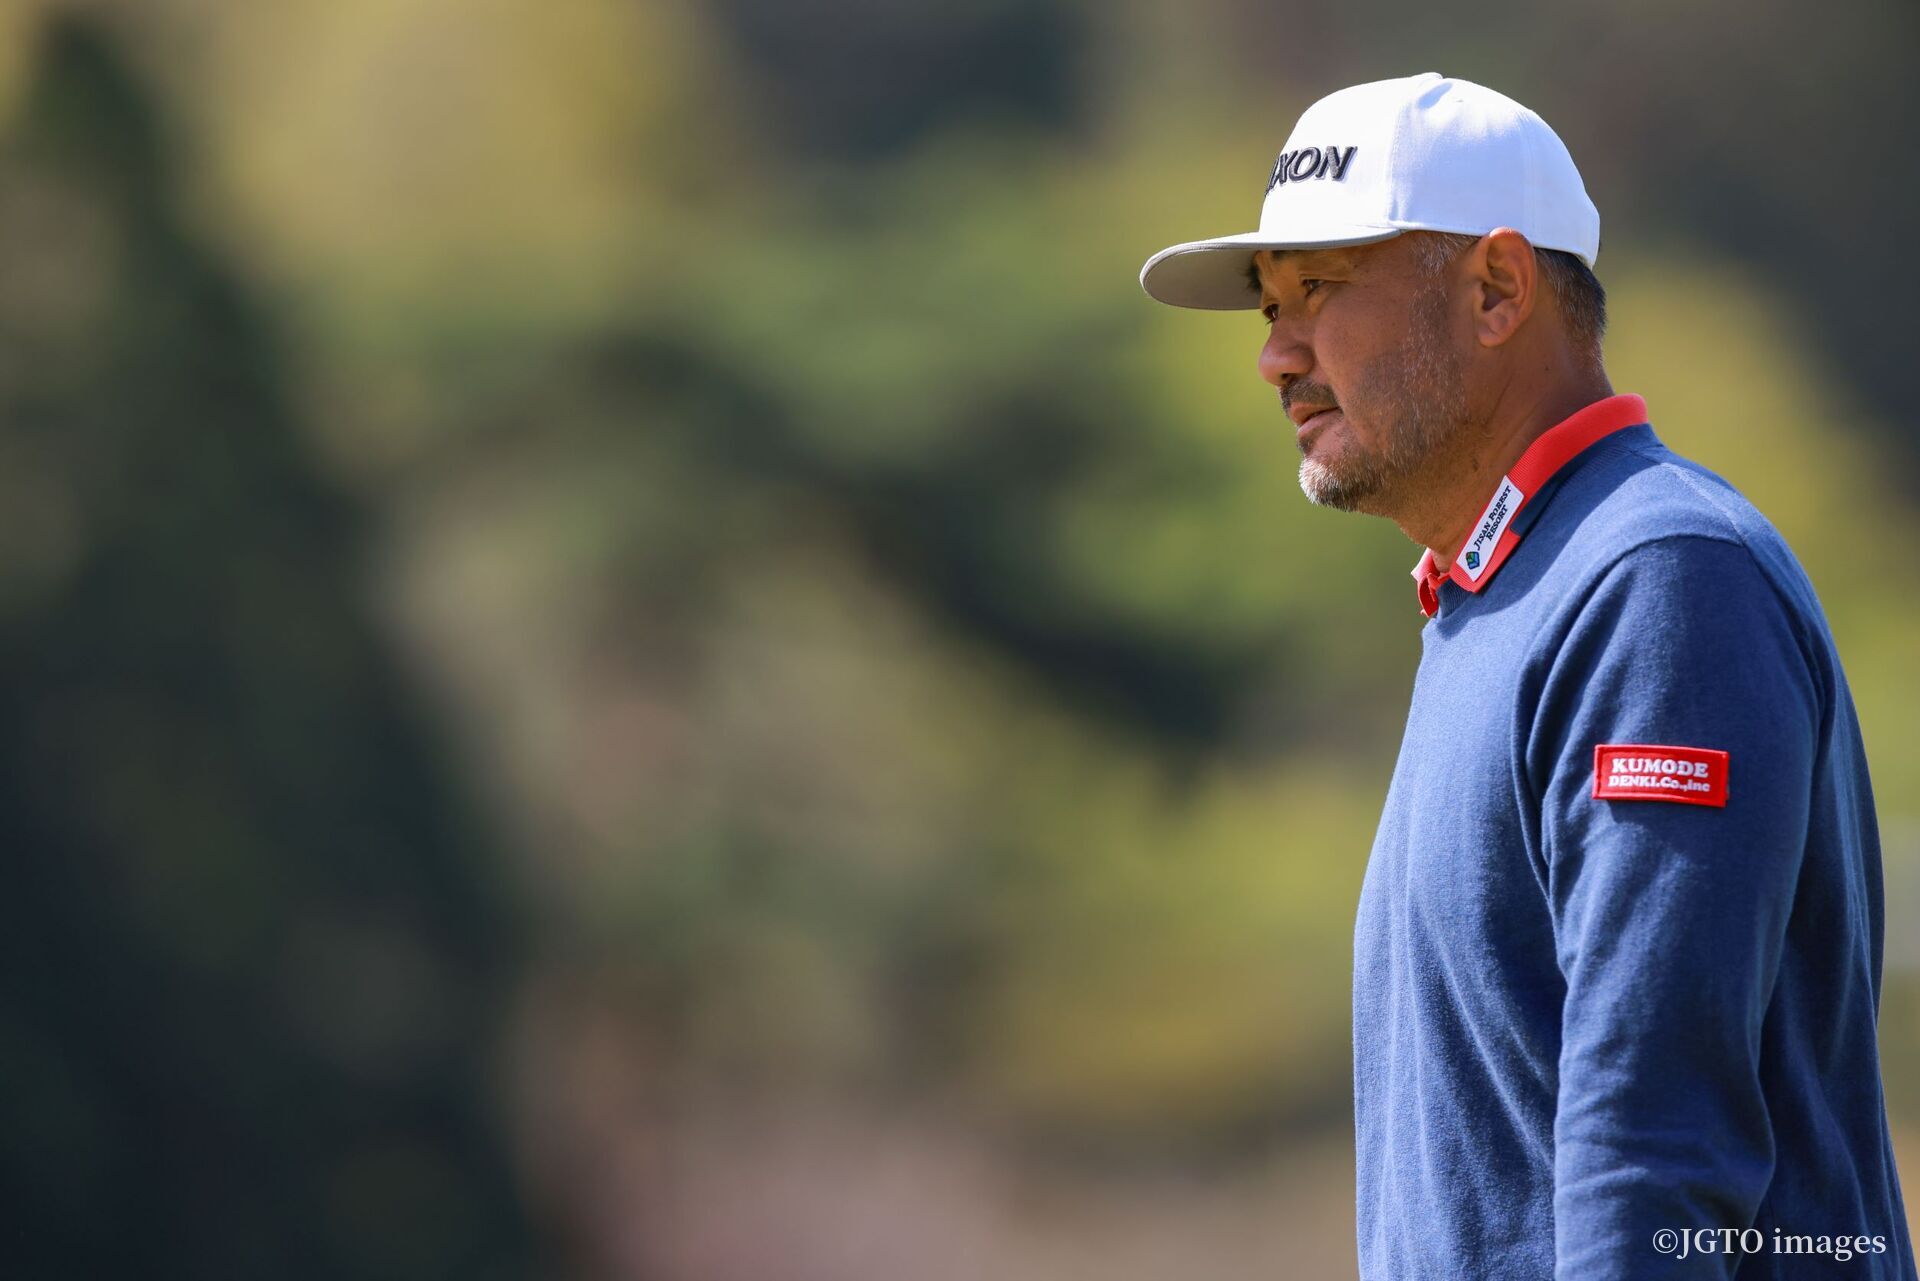 Practice makes perfect for Lee, trails Miyamoto by two